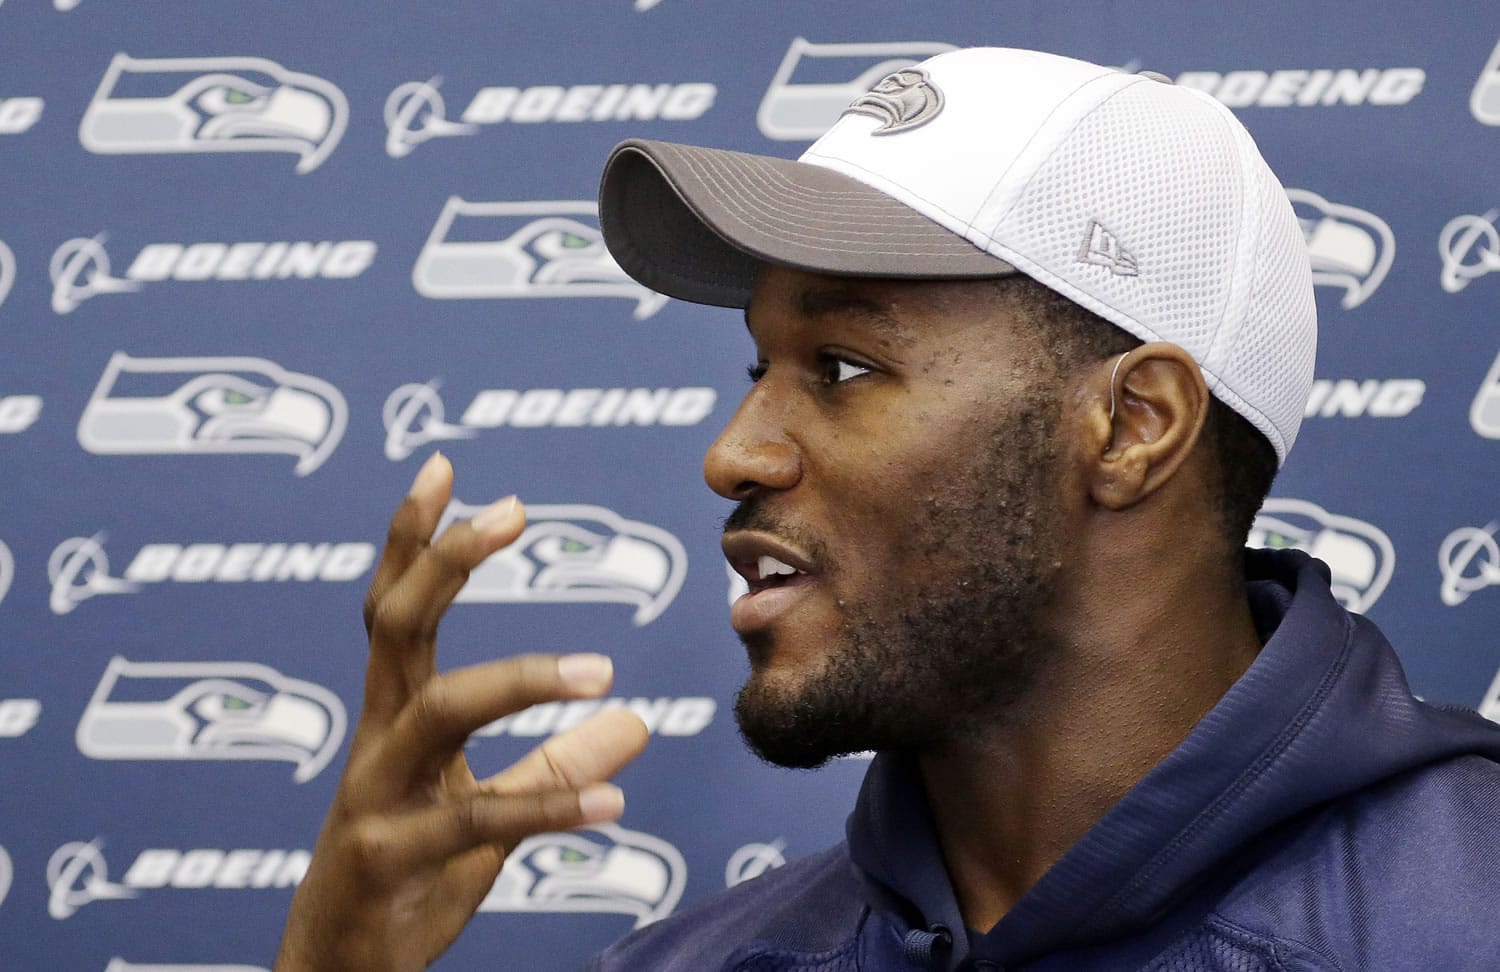 Seattle Seahawks' fullback Derrick Coleman has been arrested and is under investigation of vehicular assault and felony hit-and-run.  According to jail records, Coleman was booked into King County Jail in Seattle early Thursday, Oct. 15, 2015,  and bail was denied. Coleman, who is legally deaf, is in his fourth season with the Seahawks.